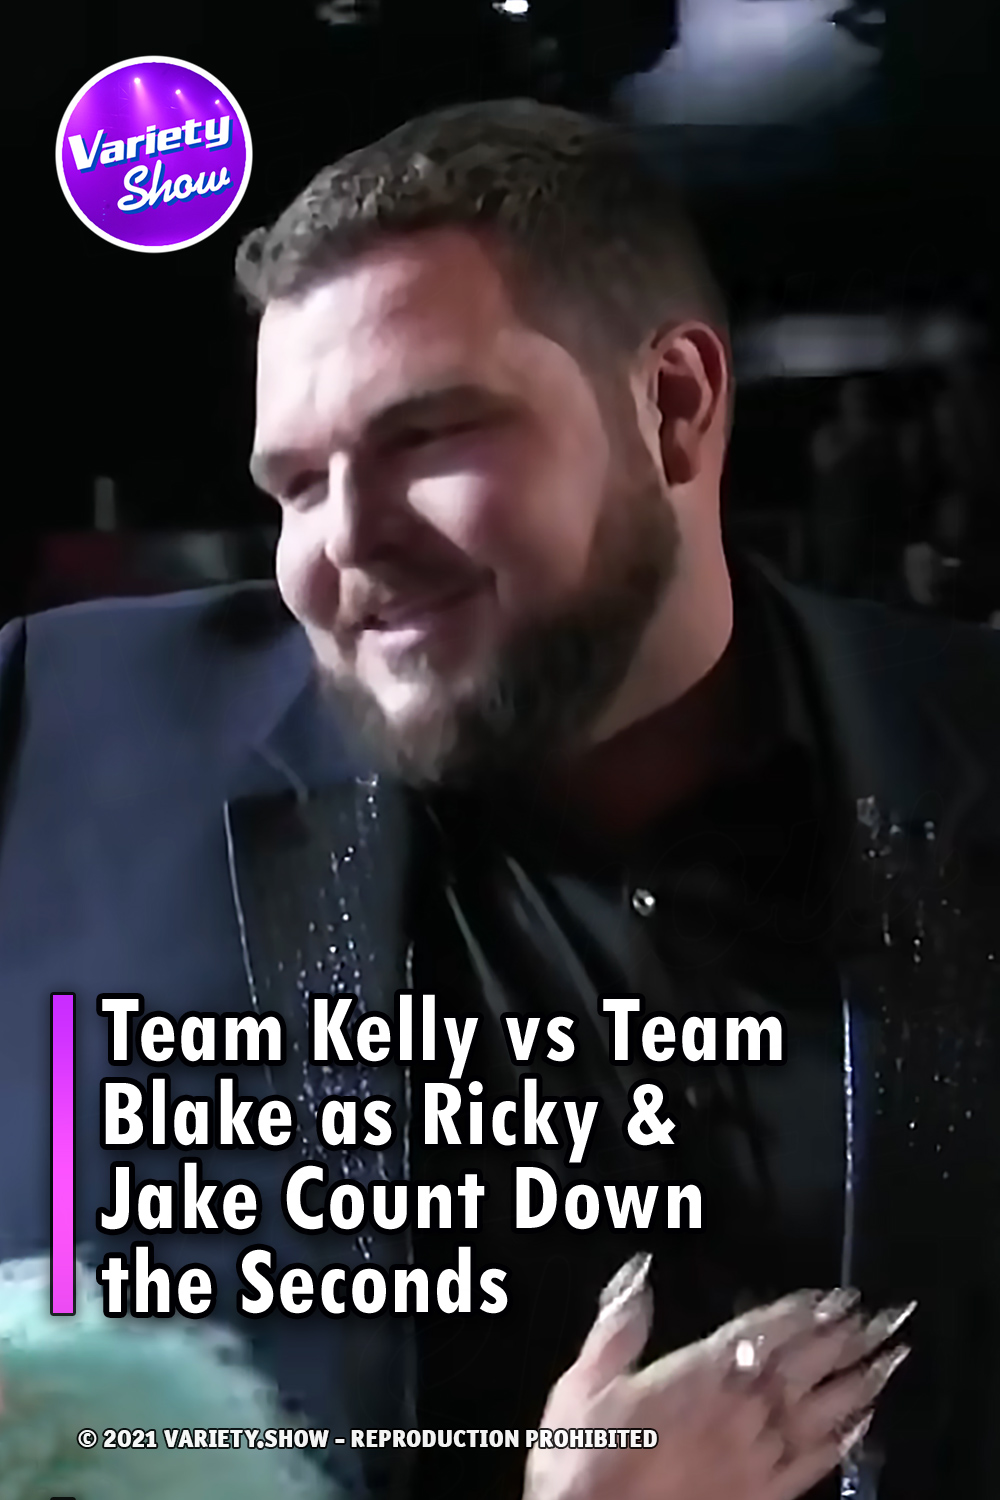 Team Kelly vs Team Blake as Ricky & Jake Count Down the Seconds